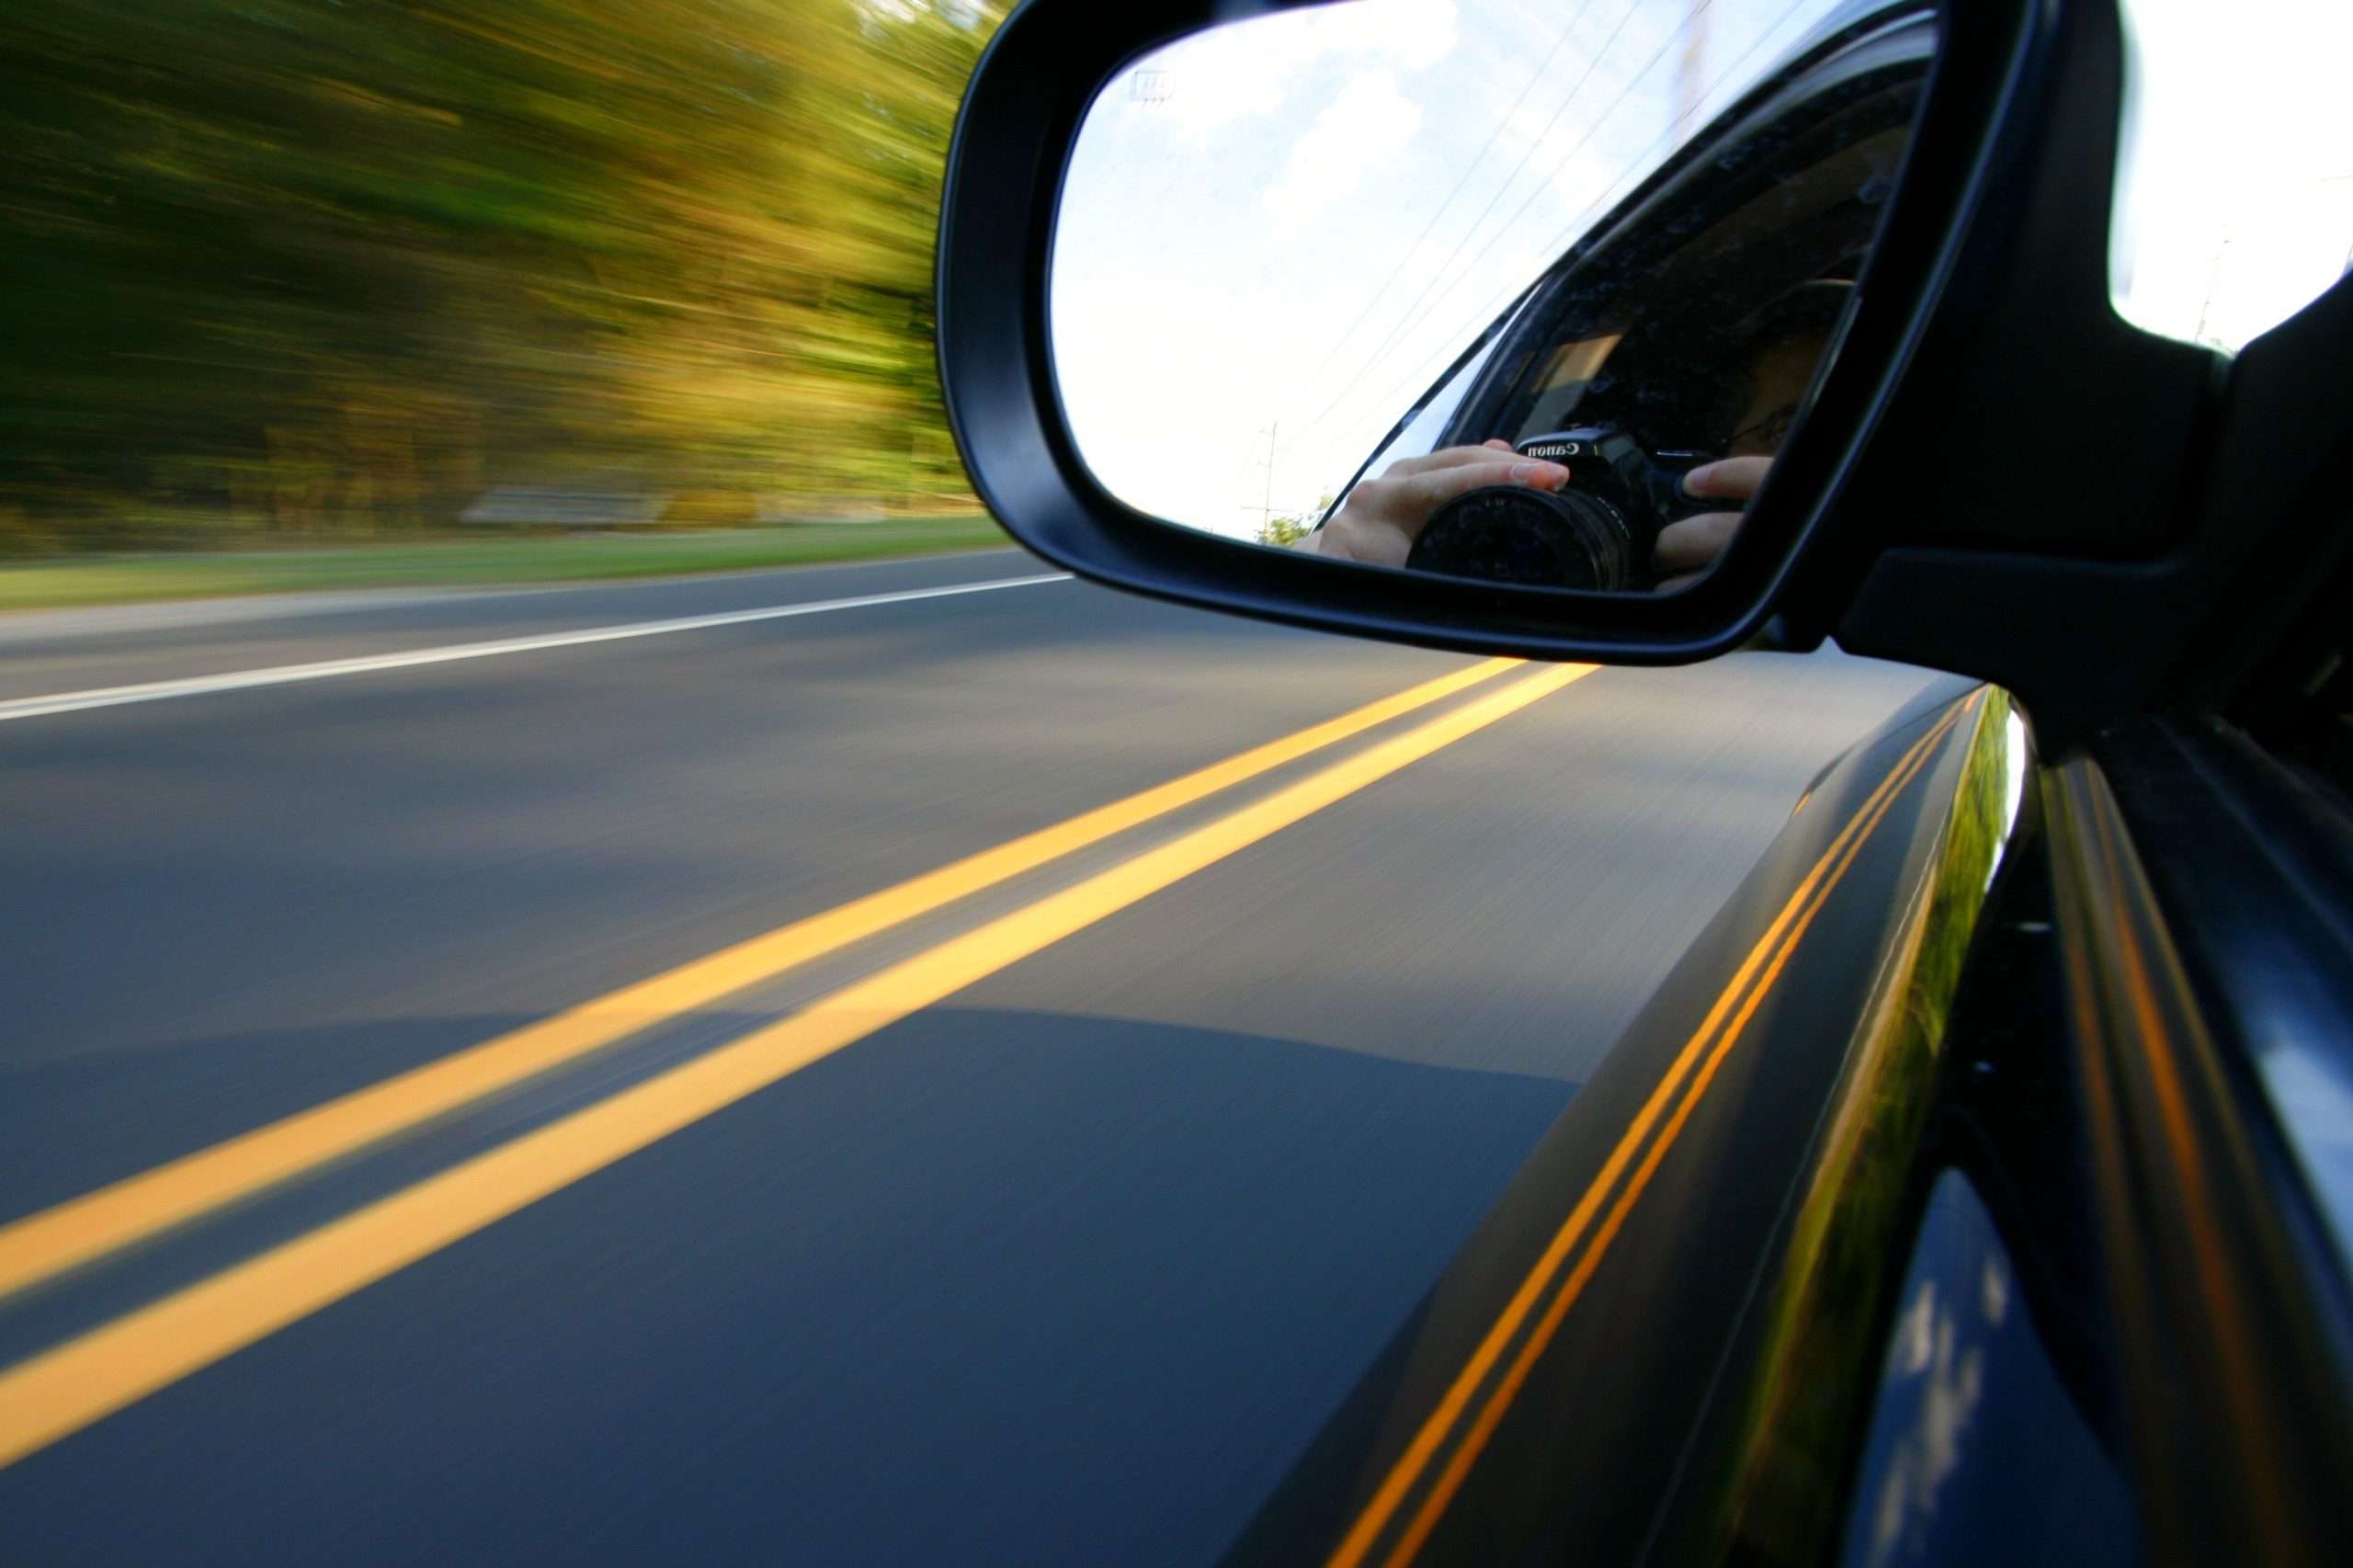 Six questions to answer to test your driving courtesy